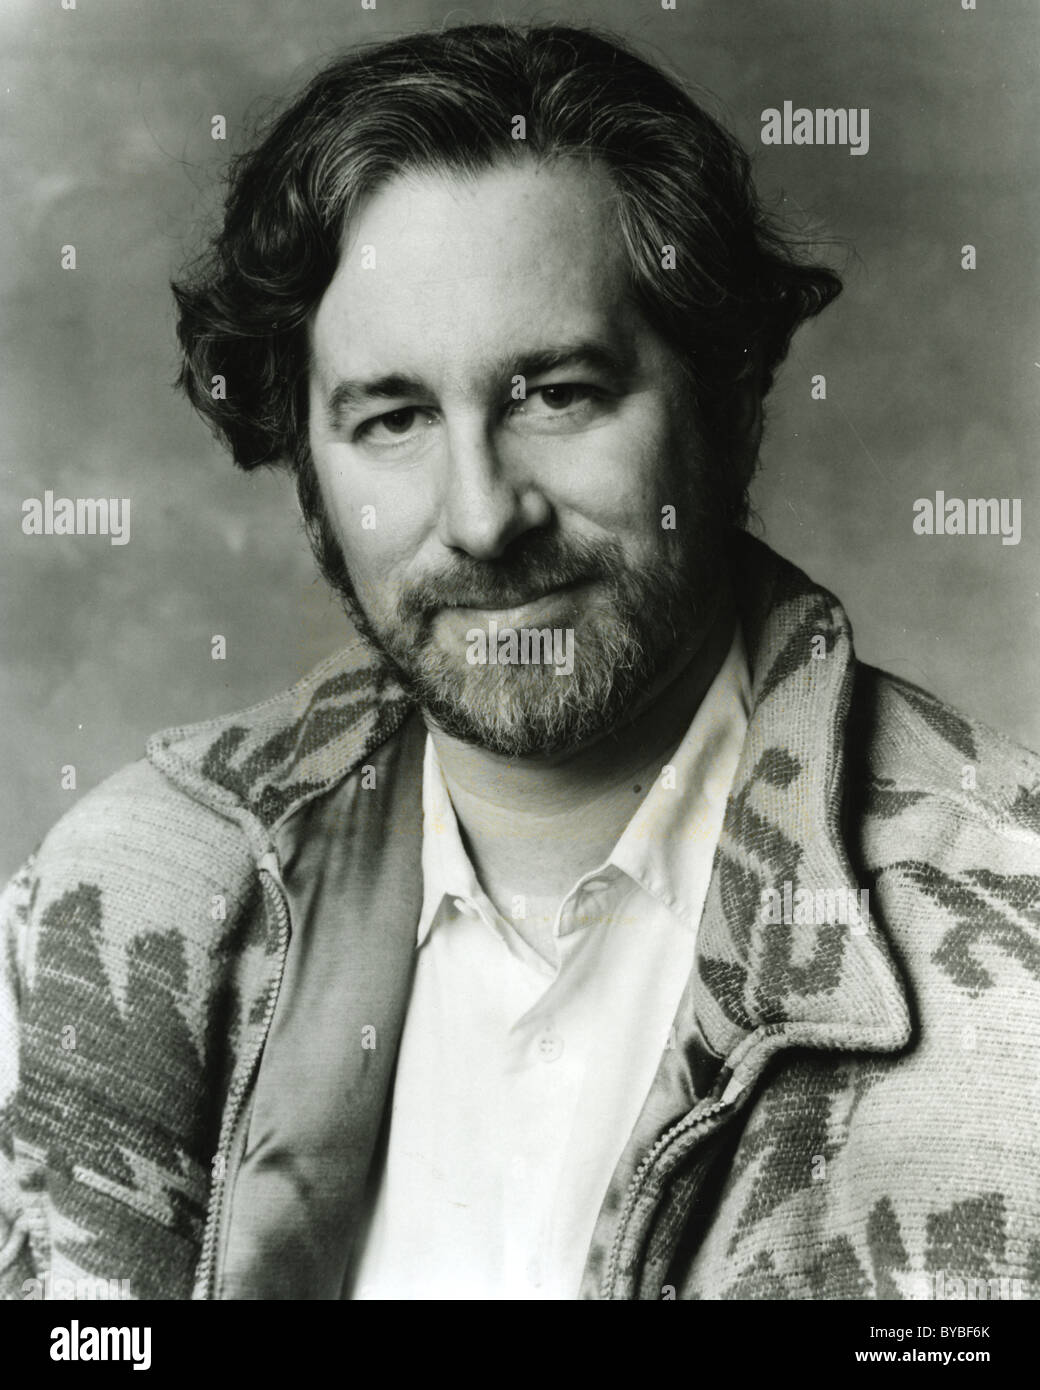 STEVEN SPIELBERG Promotional photo of US film director and screen writer about 1970 Stock Photo